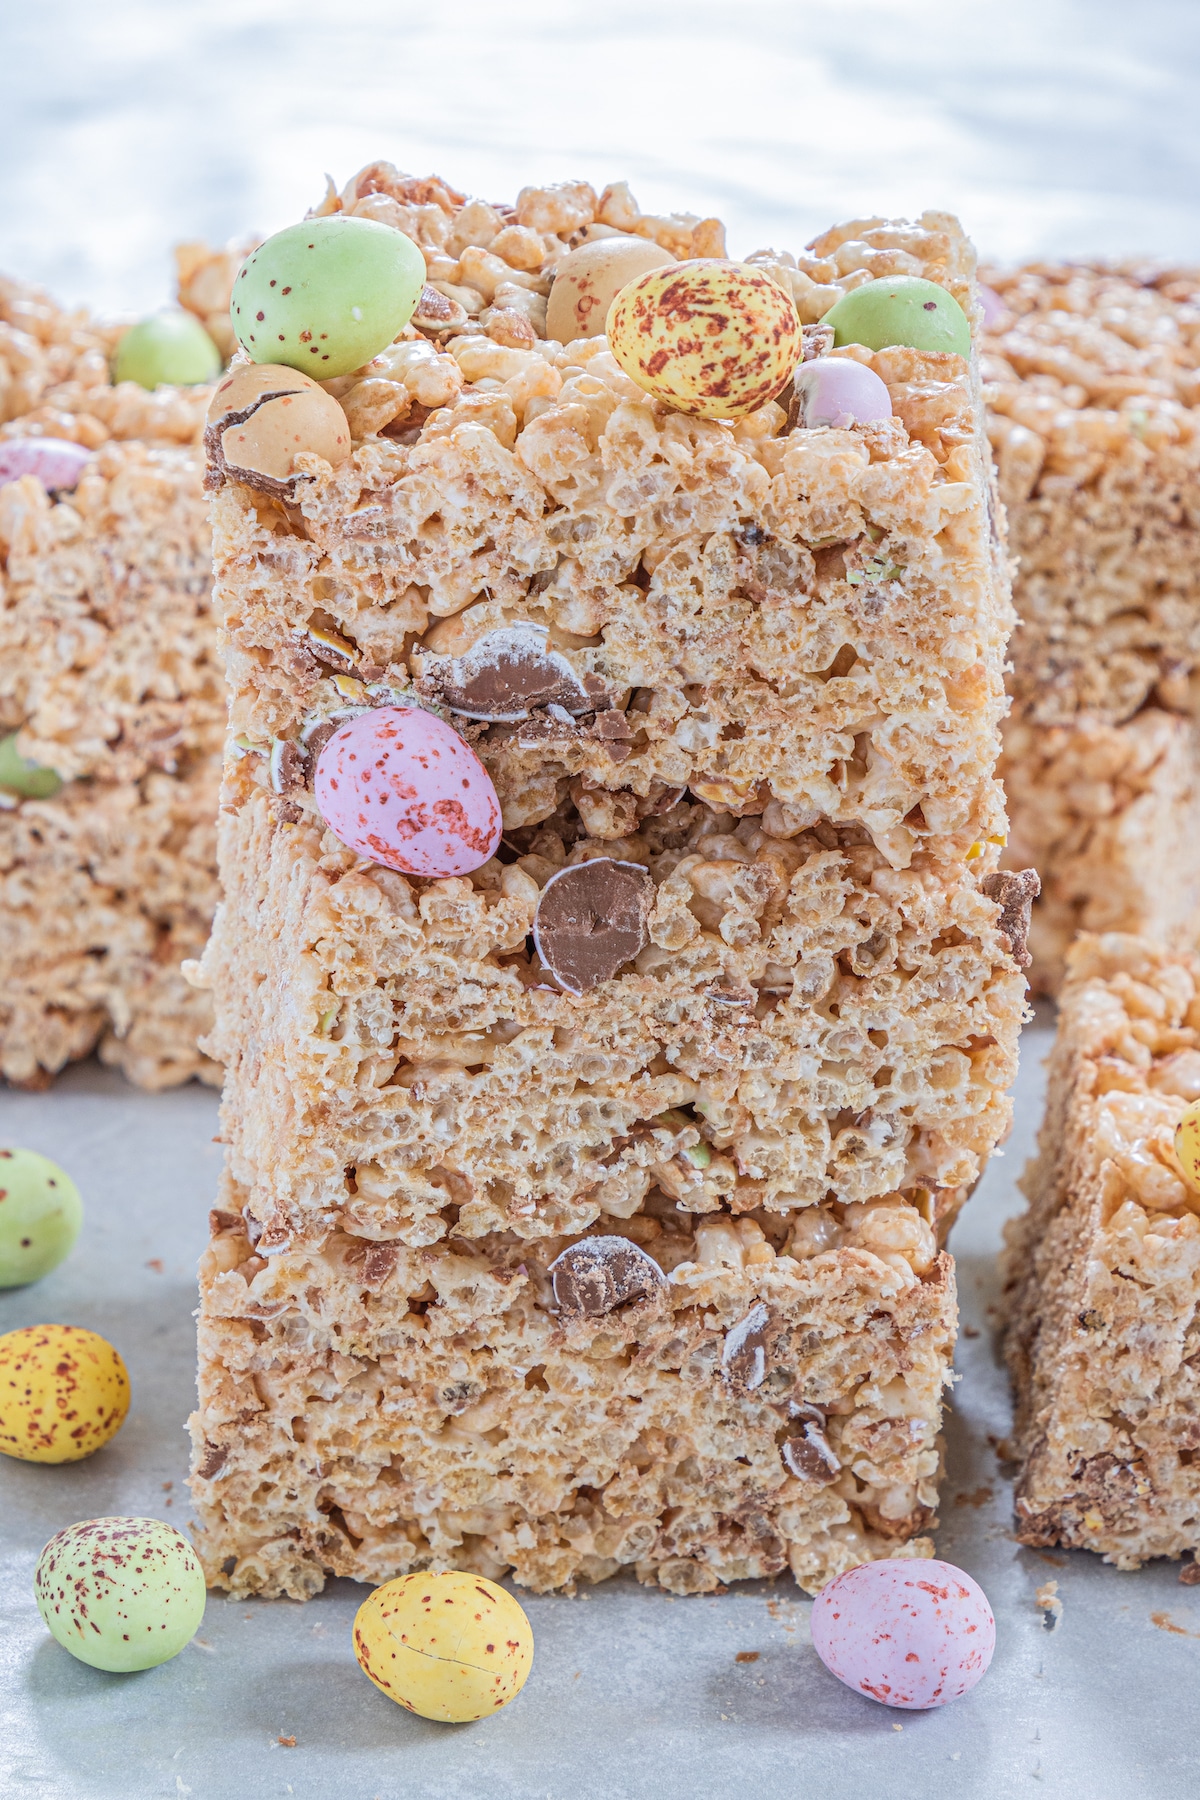 Three Easter rice krispie treats stacked on eachother with more chocolate egg candies around them